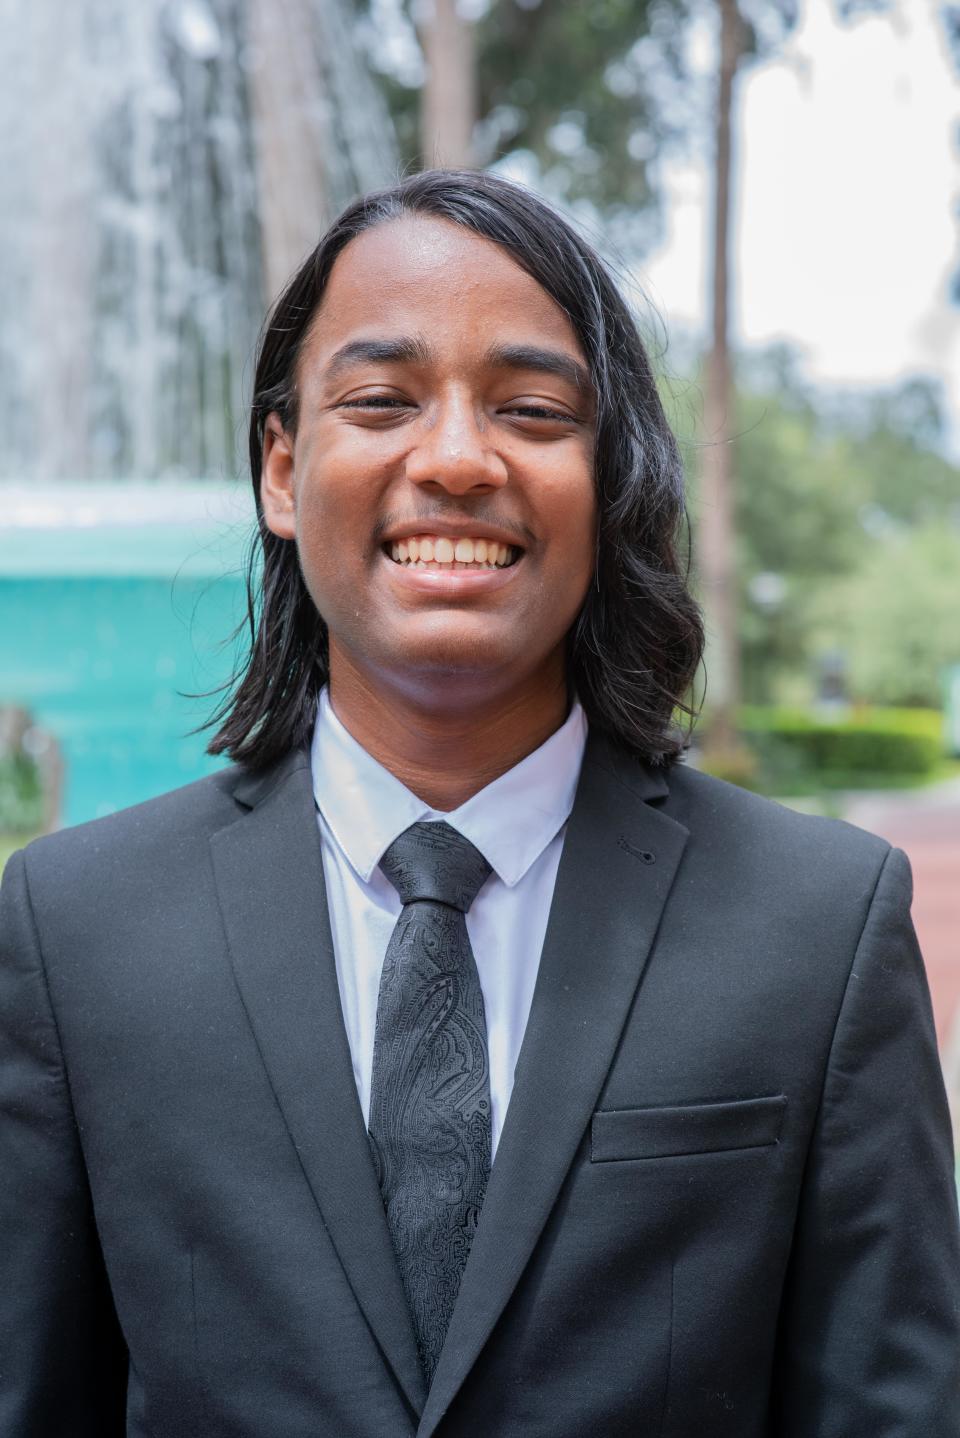 Tristyn Rampersad is on Stetson University's moot court team, which is headed to the American Moot Court Association National Tournament in Baton Rouge, Louisiana, on Jan. 14 and 15.